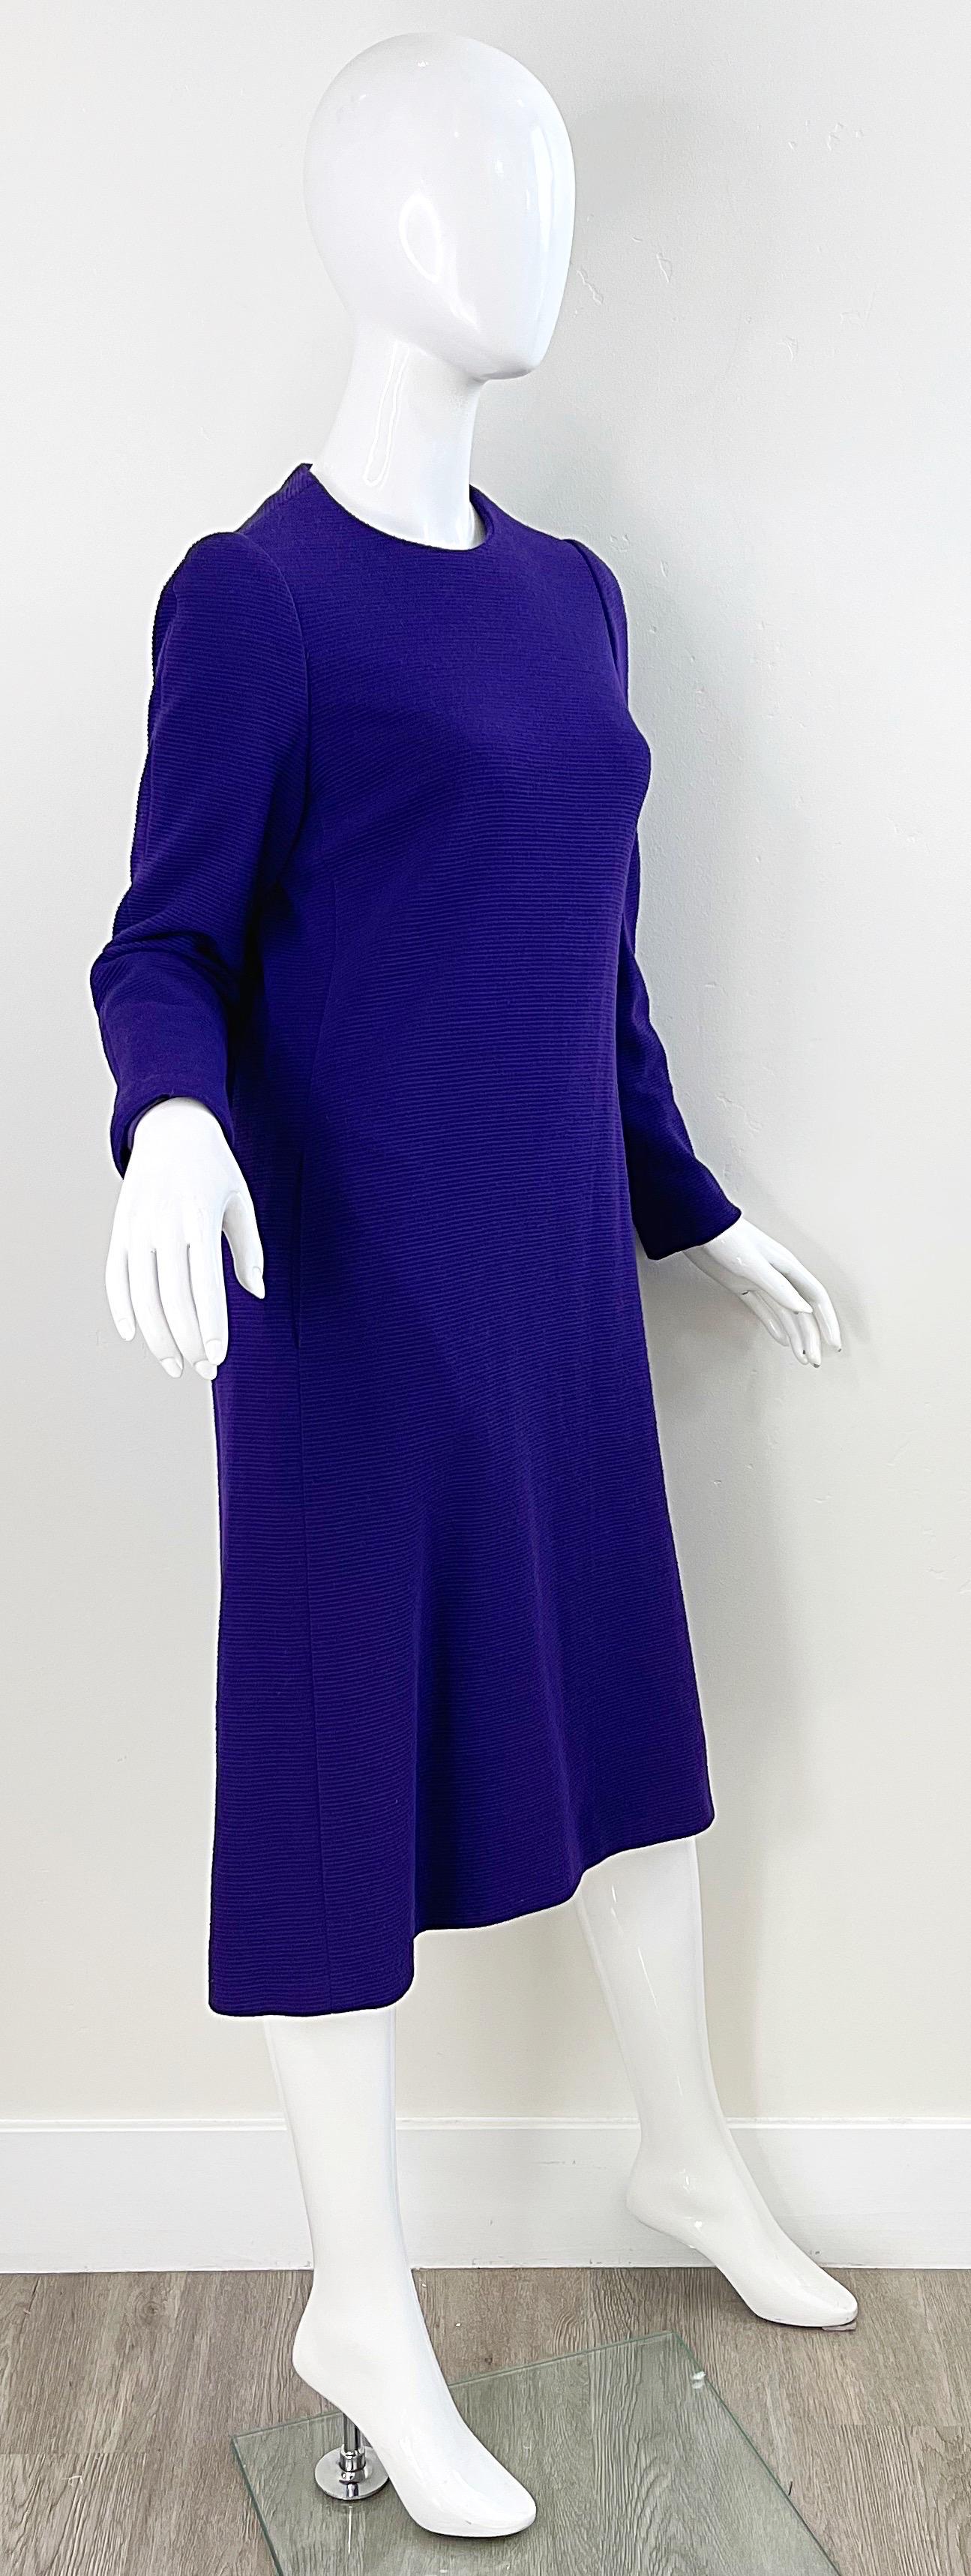 1970s Halston Purple Wool Long Sleeve Vintage Chic 70s Tailored Dress For Sale 5